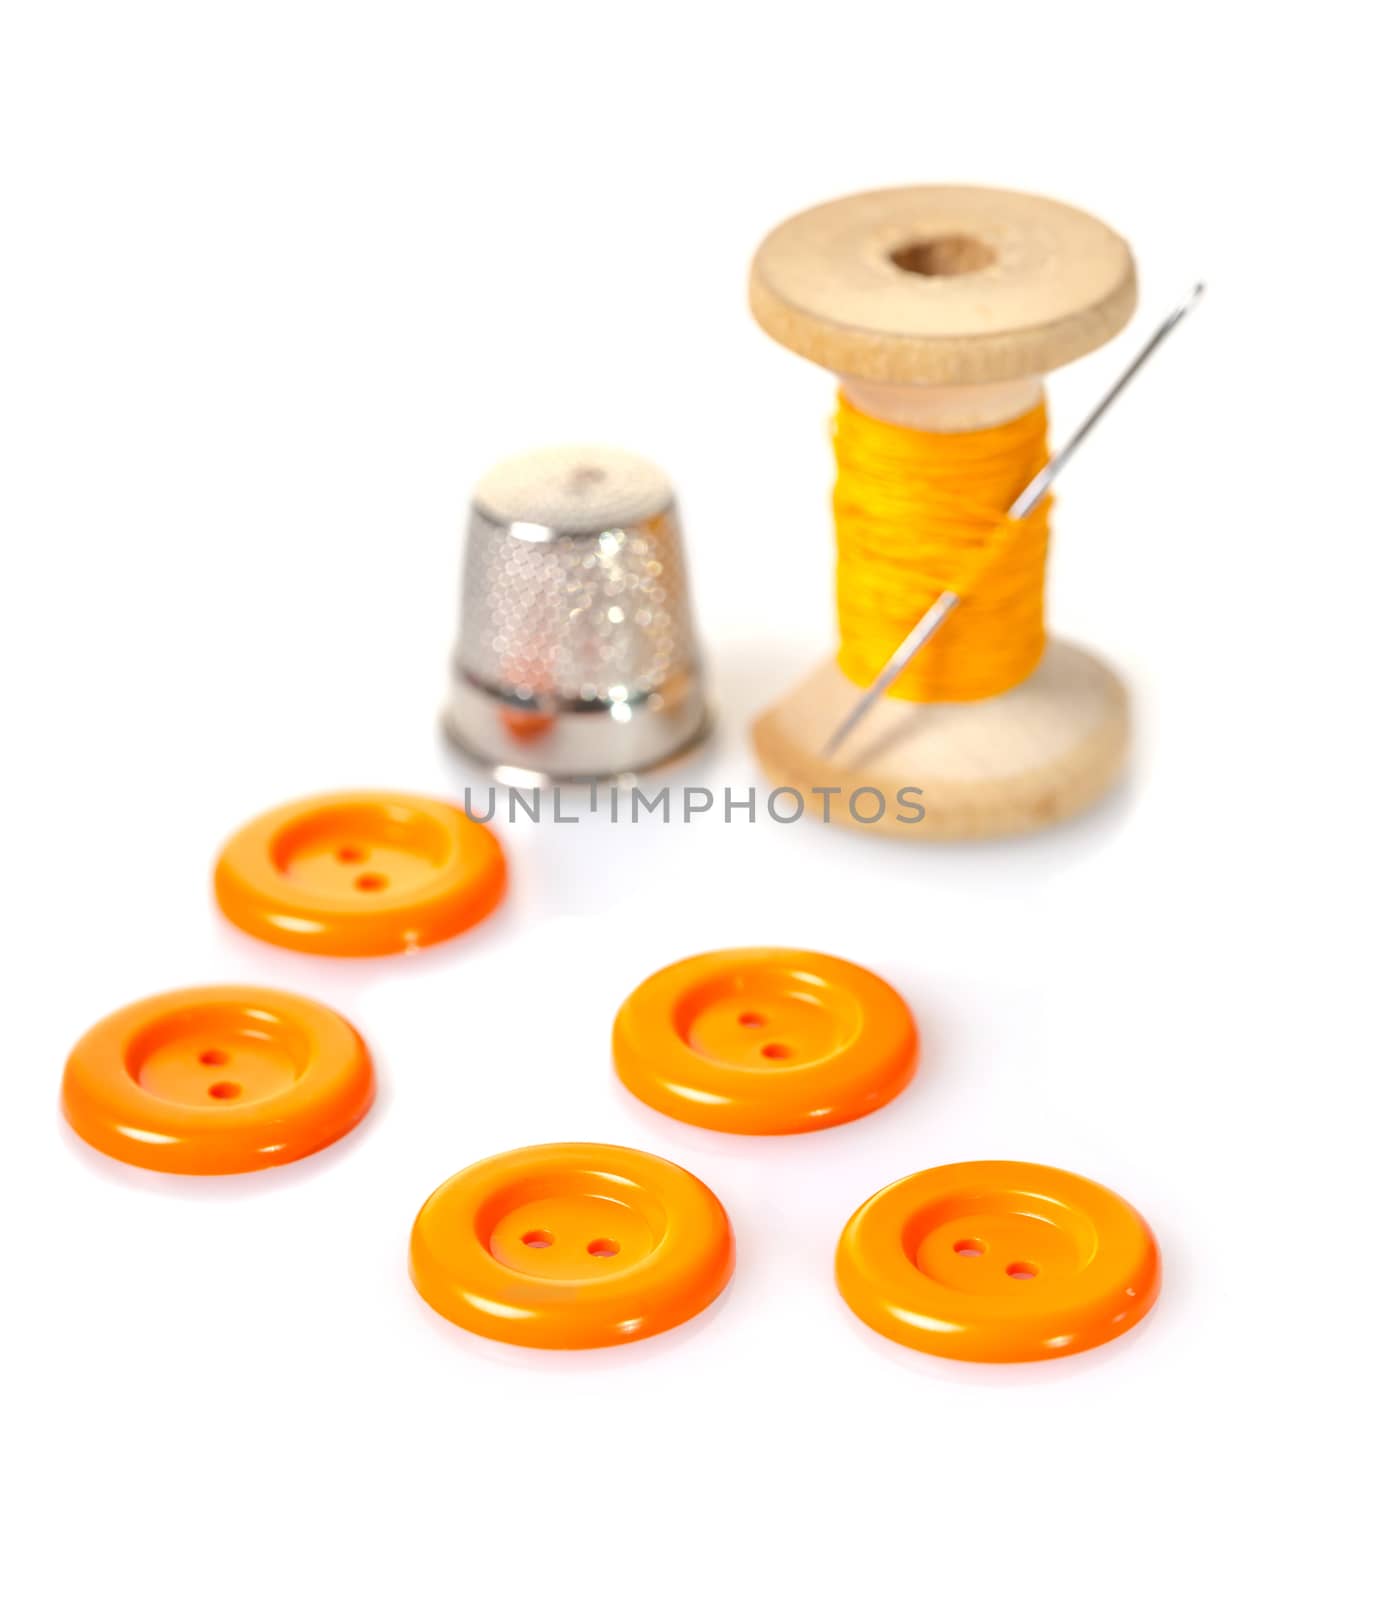 spool of thread and buttons on white isolated background